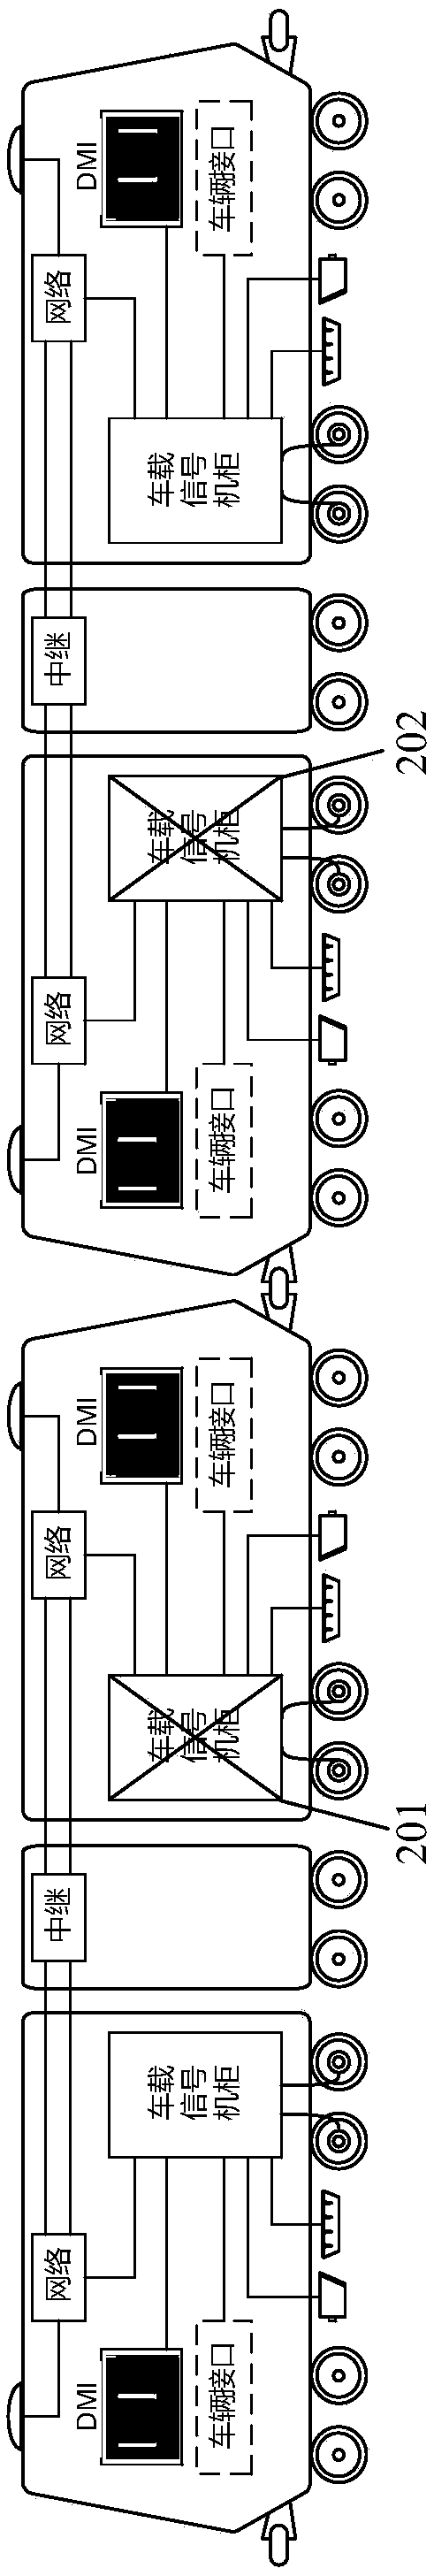 Control method of train-mounted signal system for on-line double heading of trains